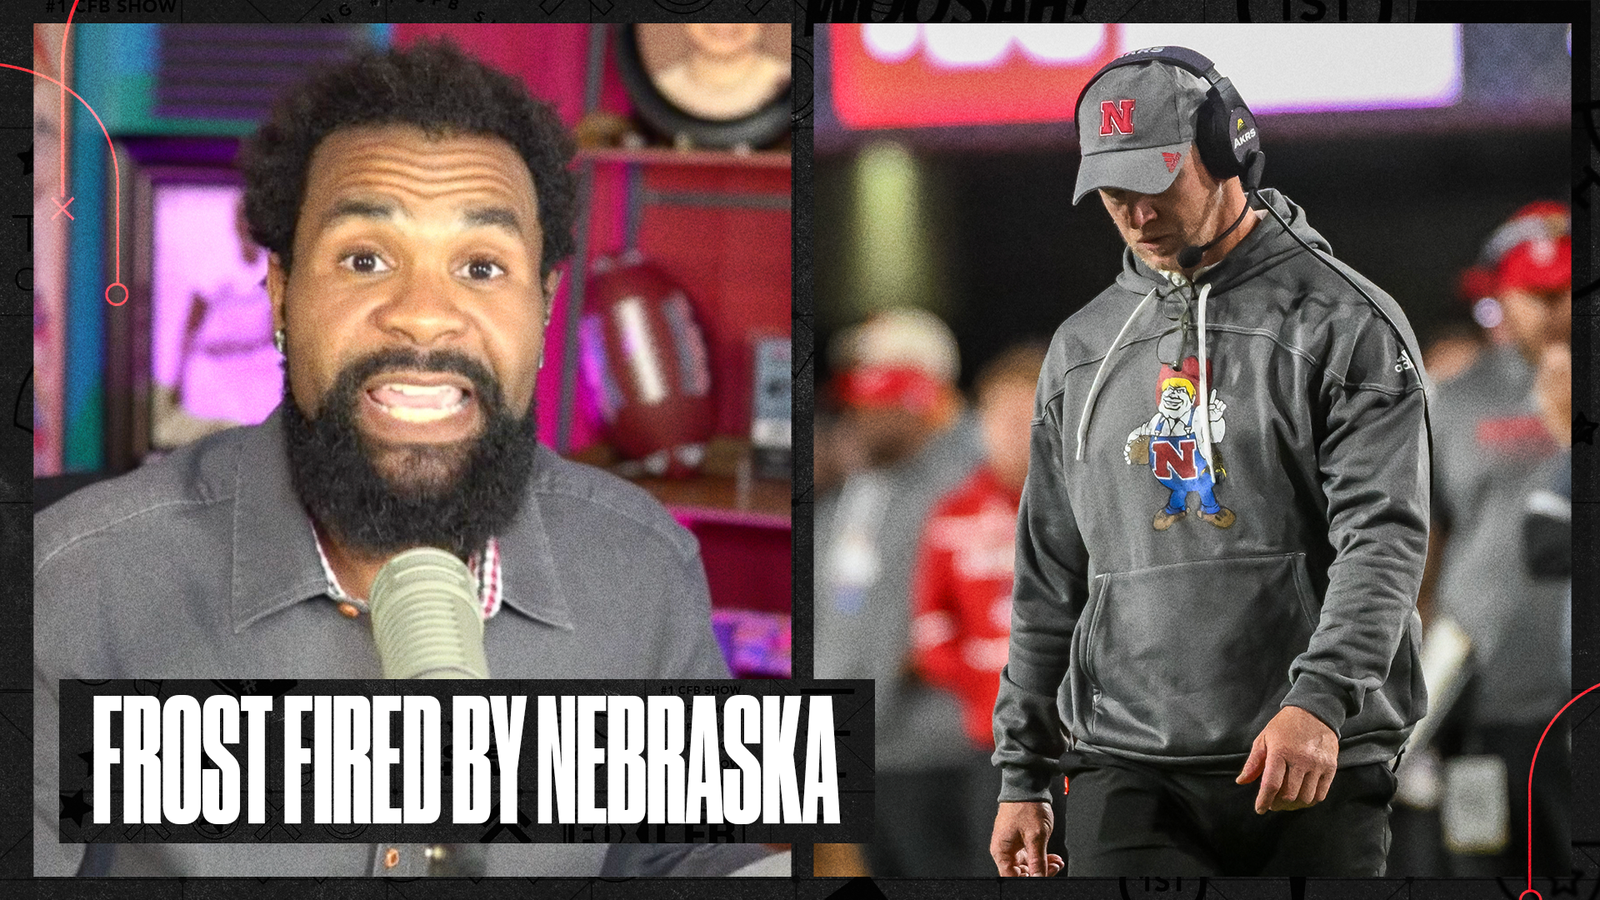 Nebraska fires Scott Frost and what it means for the Cornhuskers' future | Number One CFB Show